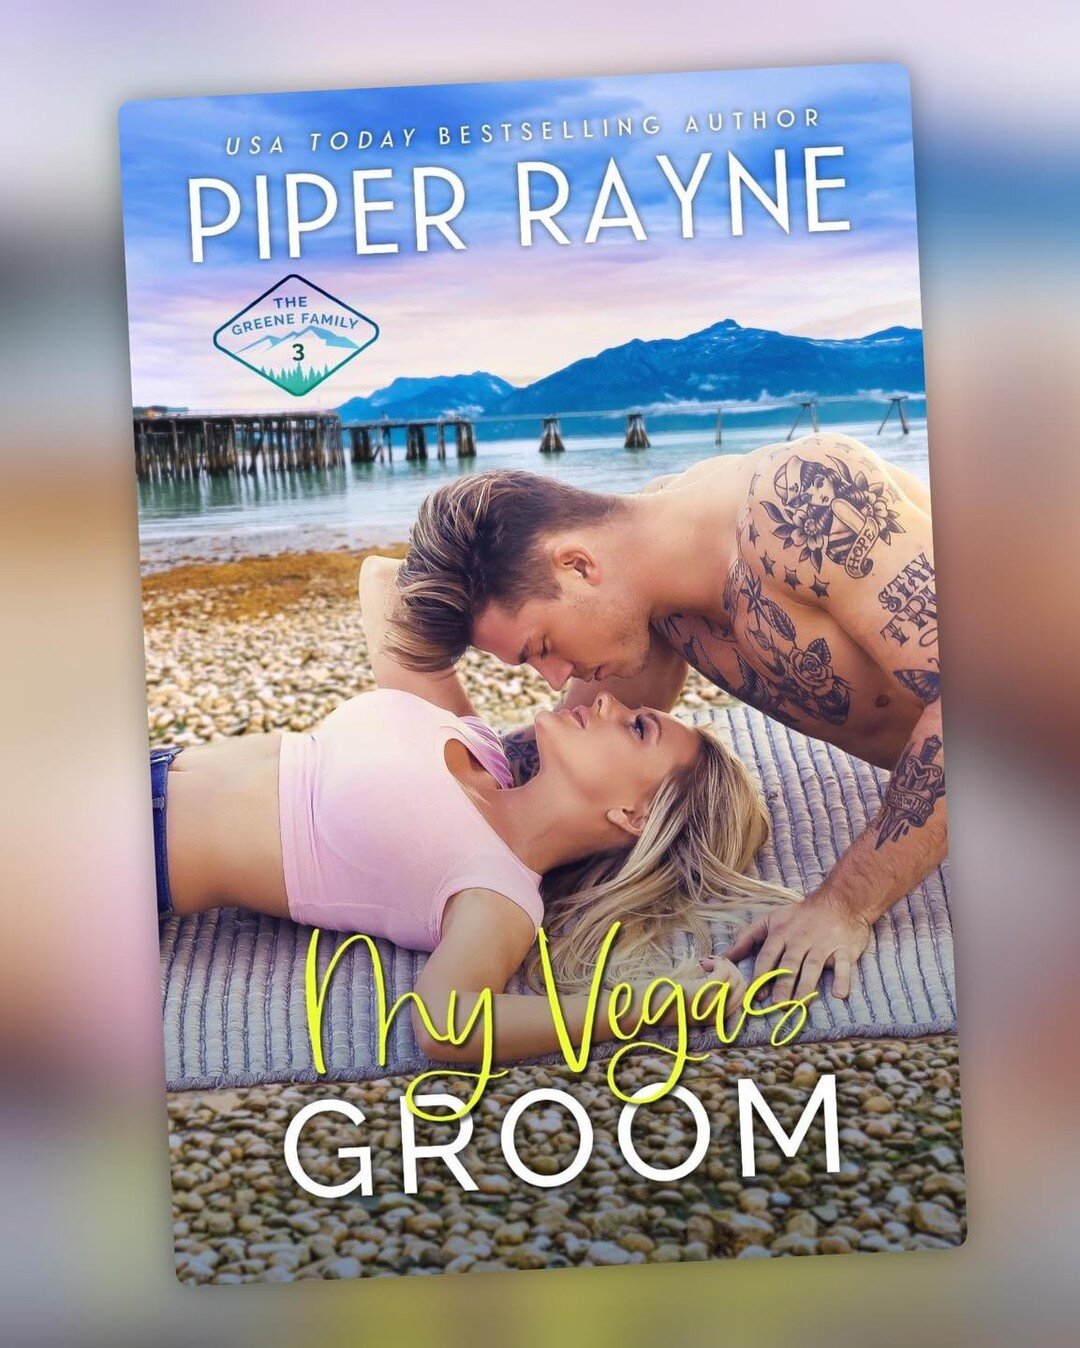 Another stunning cover from @authorpiperrayne 

MY VEGAS GROOM  is coming May 18! 

#PreOrderHere:
https://books2read.com/vegasgroom

The title speaks for itself but just in case, My Vegas Groom is an Accidental Marriage in Vegas love story in their 